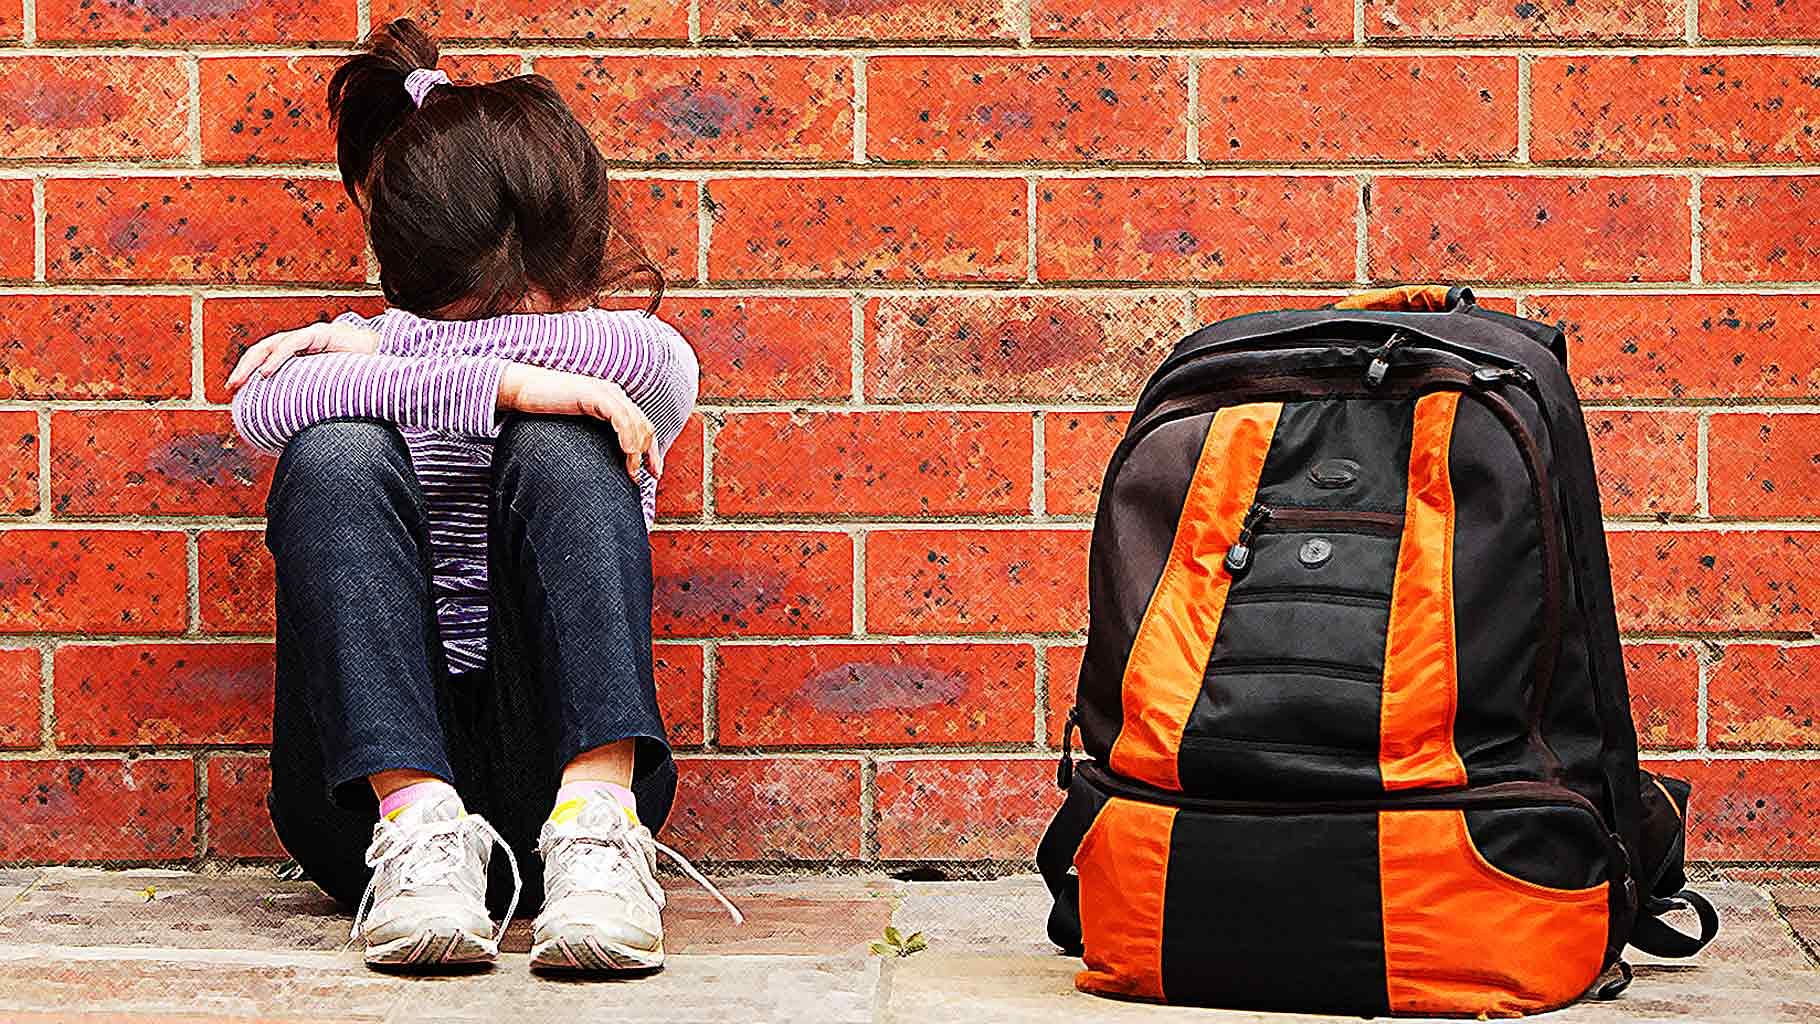 Parents and teachers face difficulties in recognising depression in children.